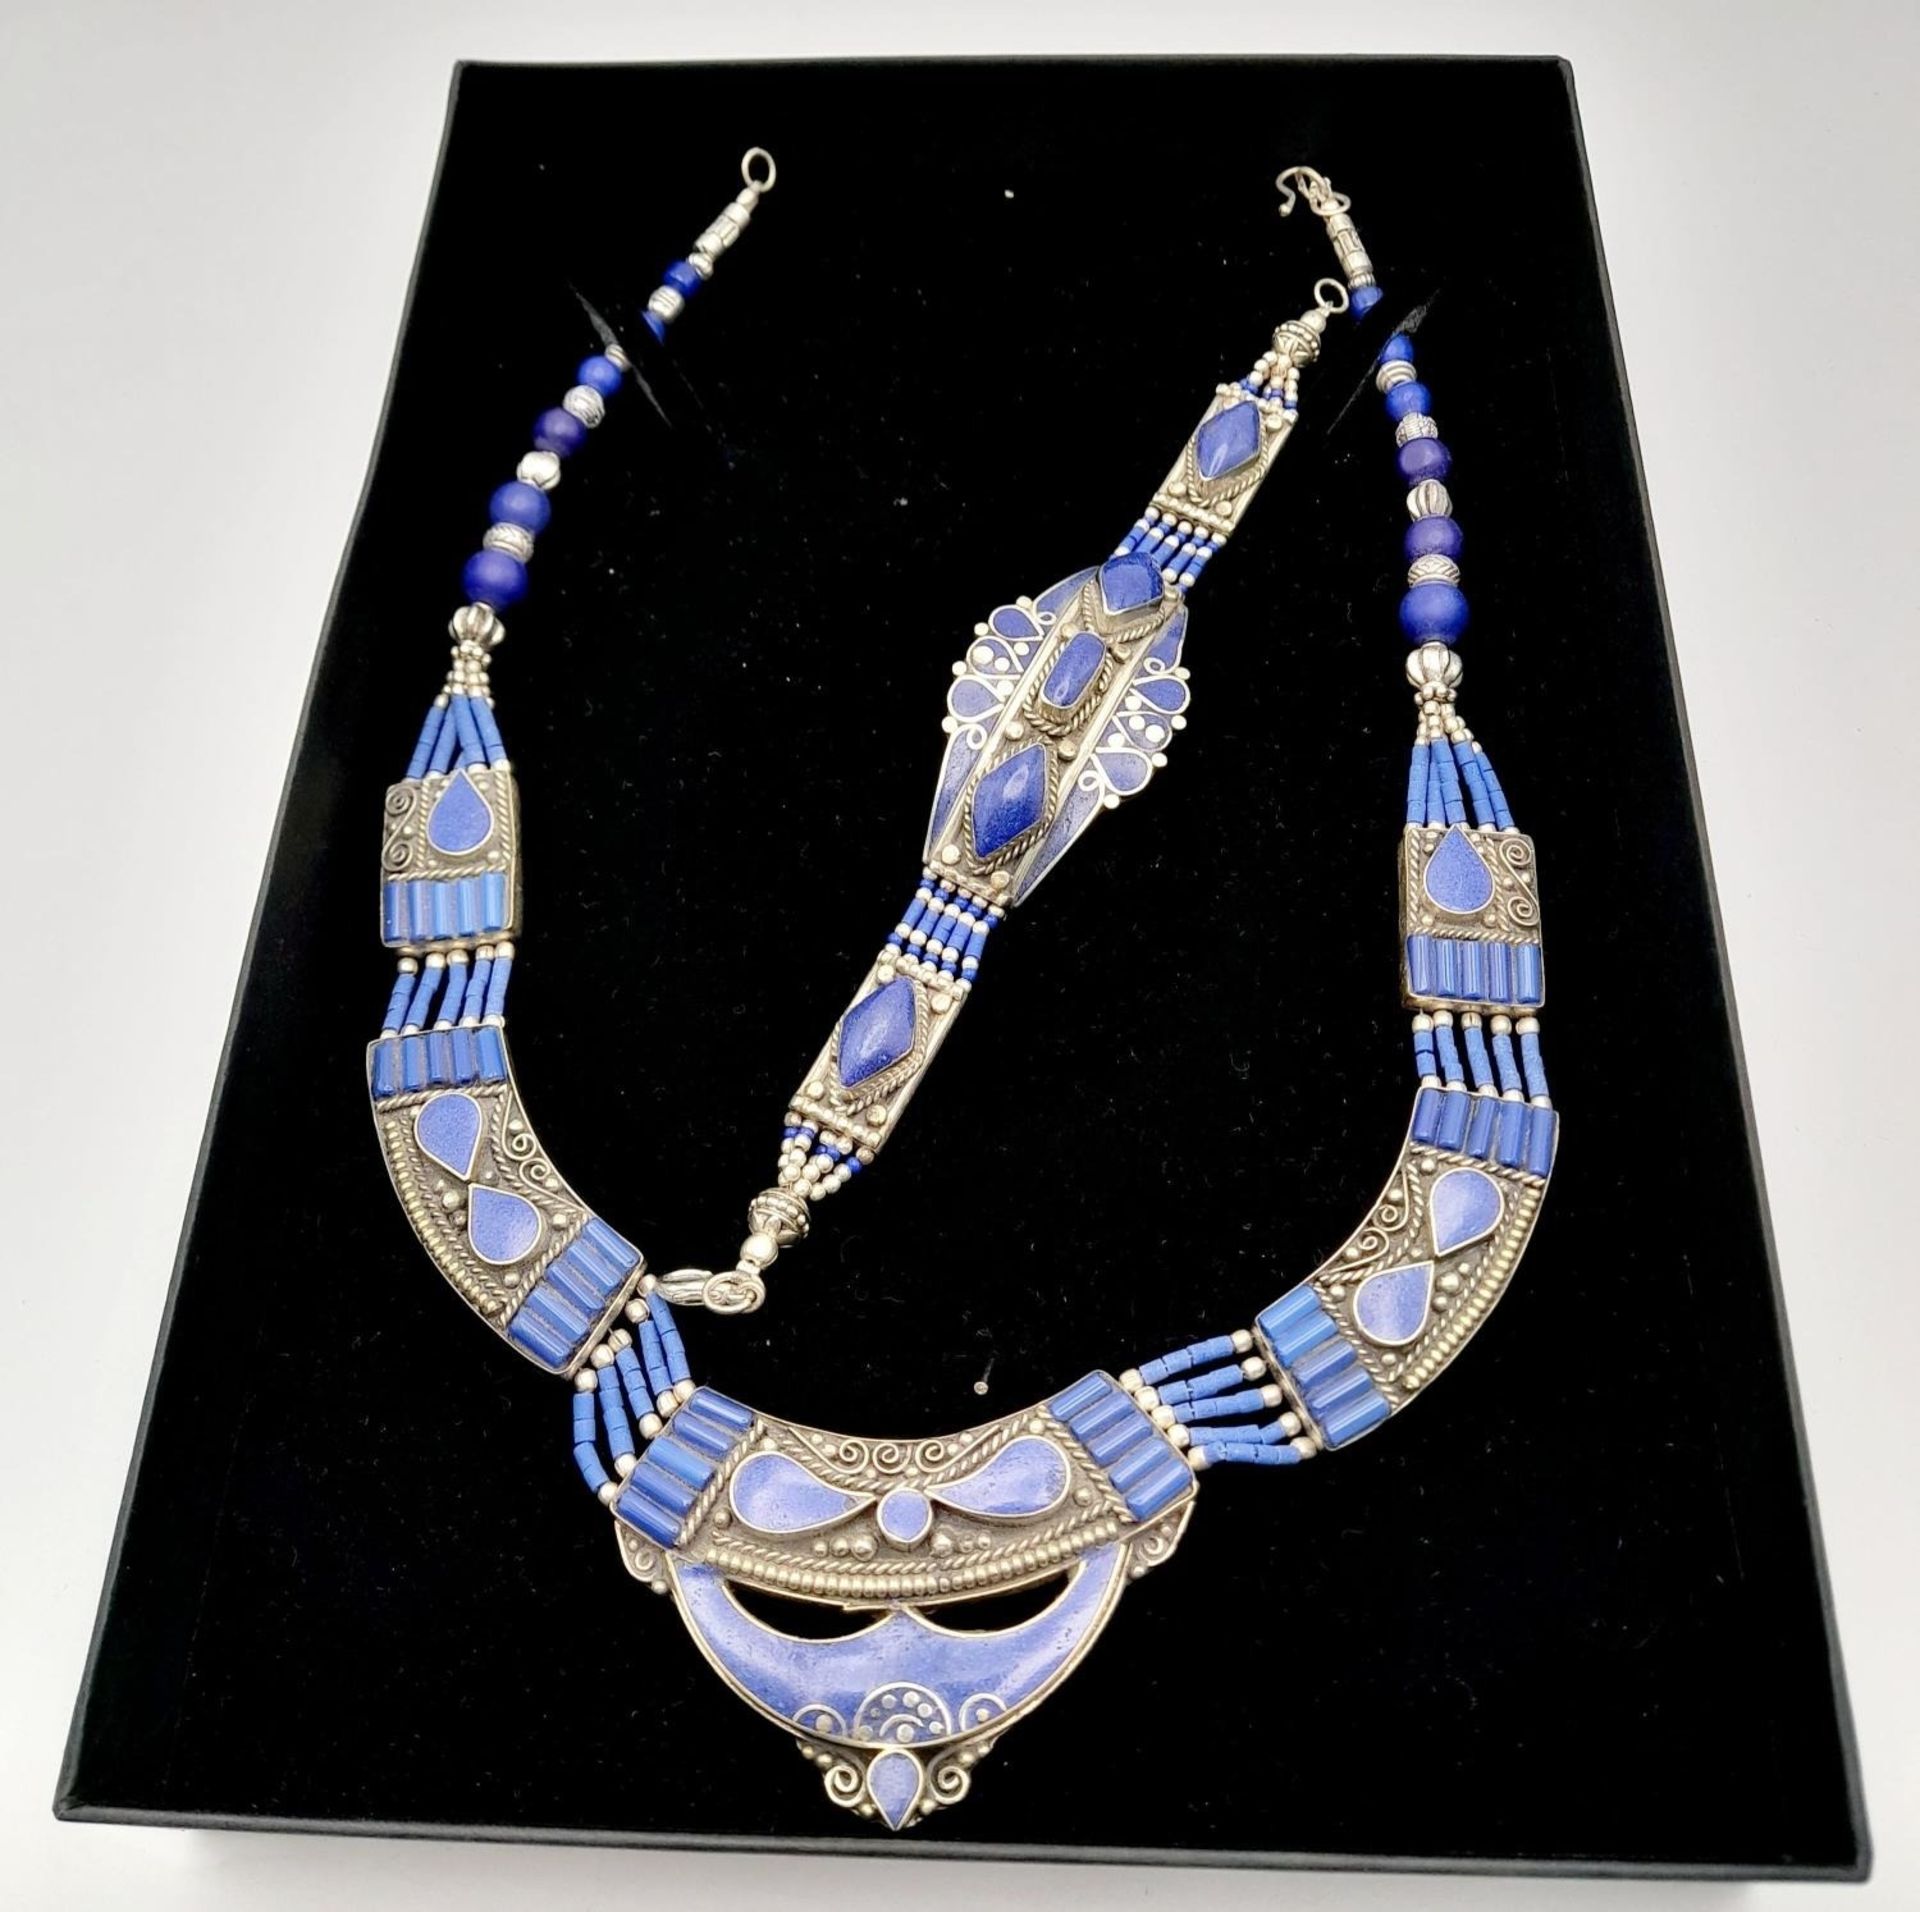 A tribal, wonderfully crafted, white metal and lapis lazuli necklace and bracelet set in a - Image 2 of 6